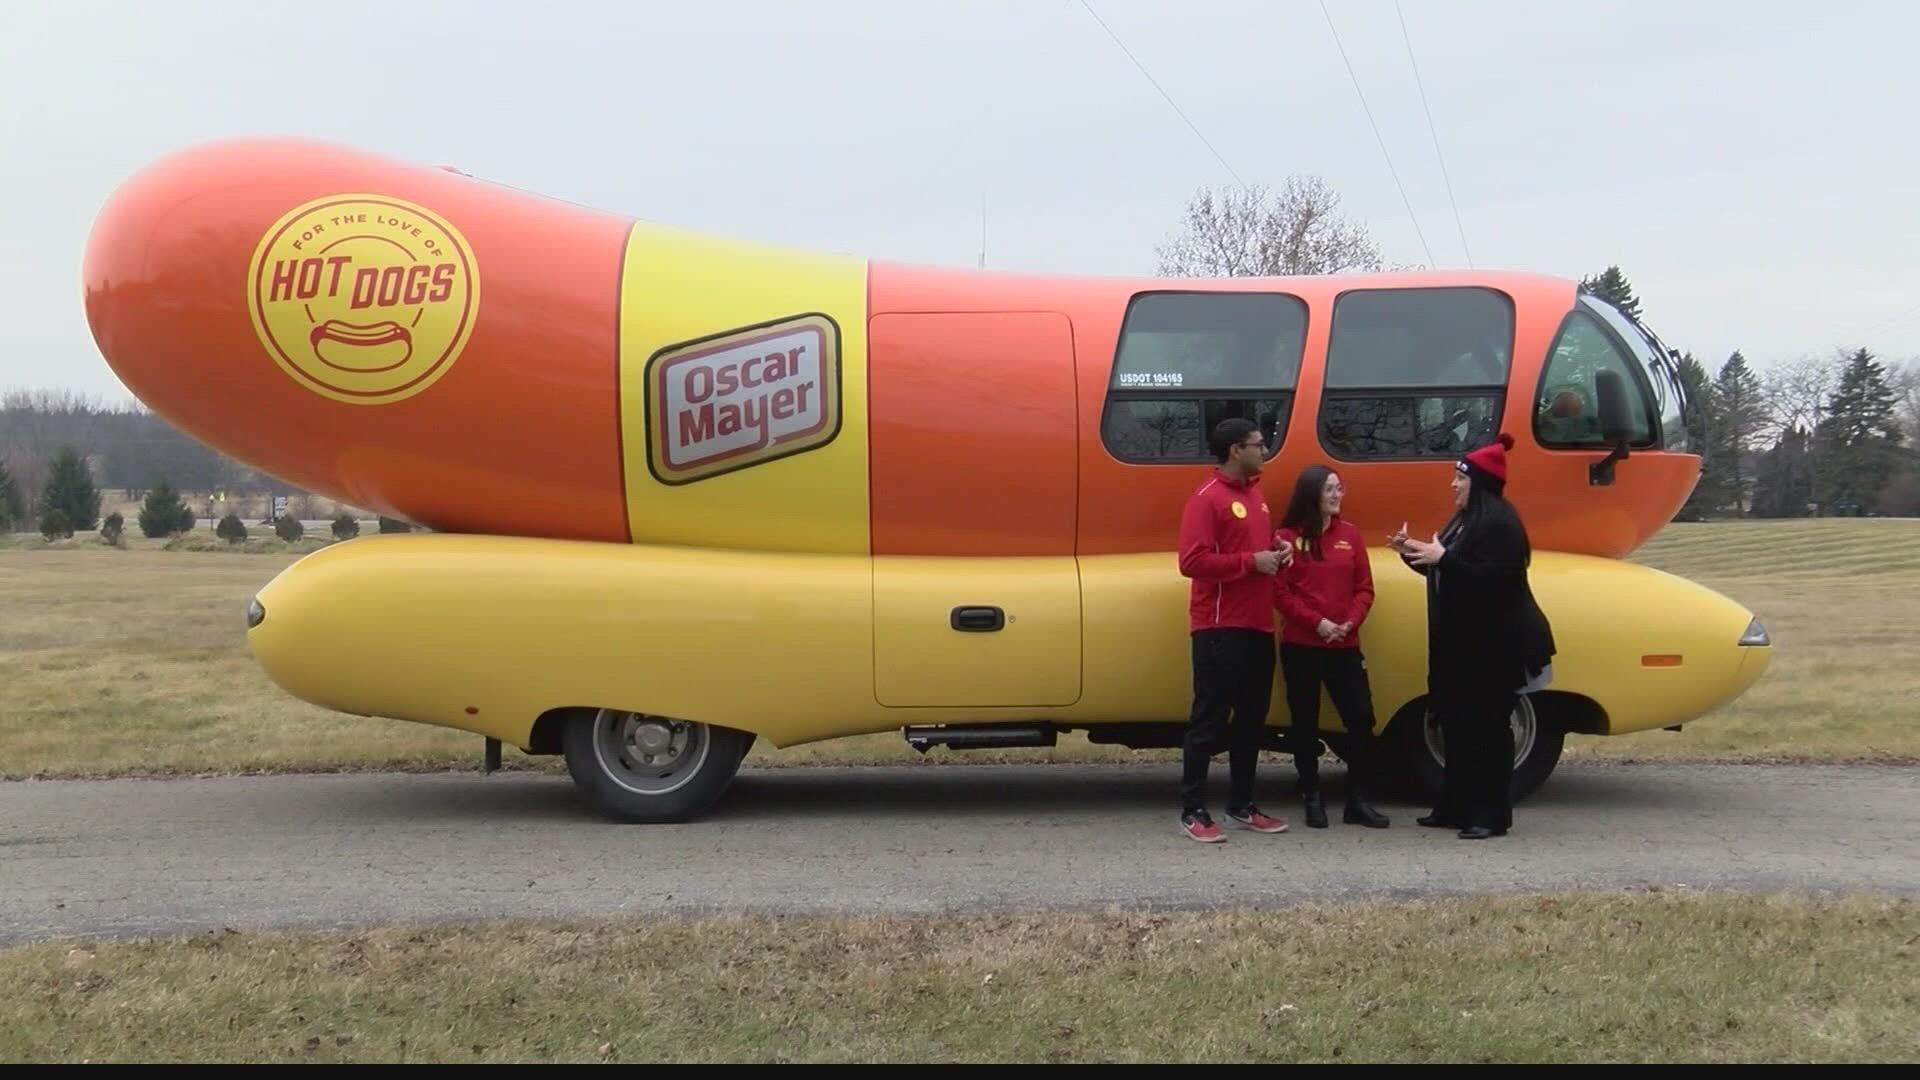 The Oscar Mayer Wienermobile is returning to St. Louis. It will visit the National Museum of Transportation in Kirkwood on Wednesday.